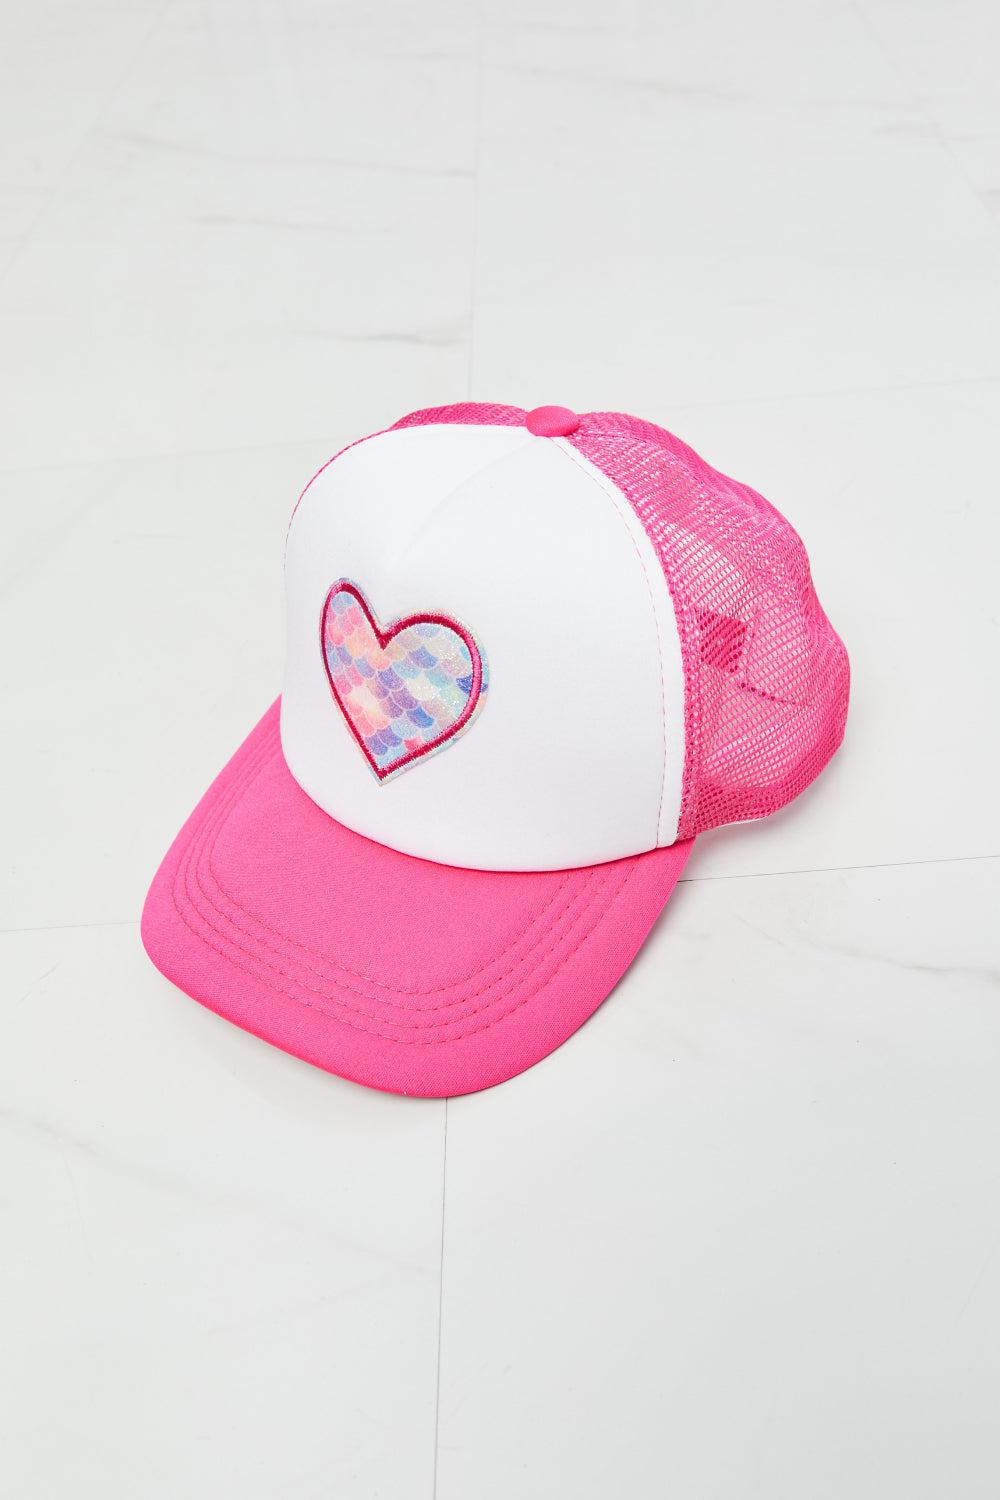 Fame Falling For You Trucker Hat in Pink BLUE ZONE PLANET